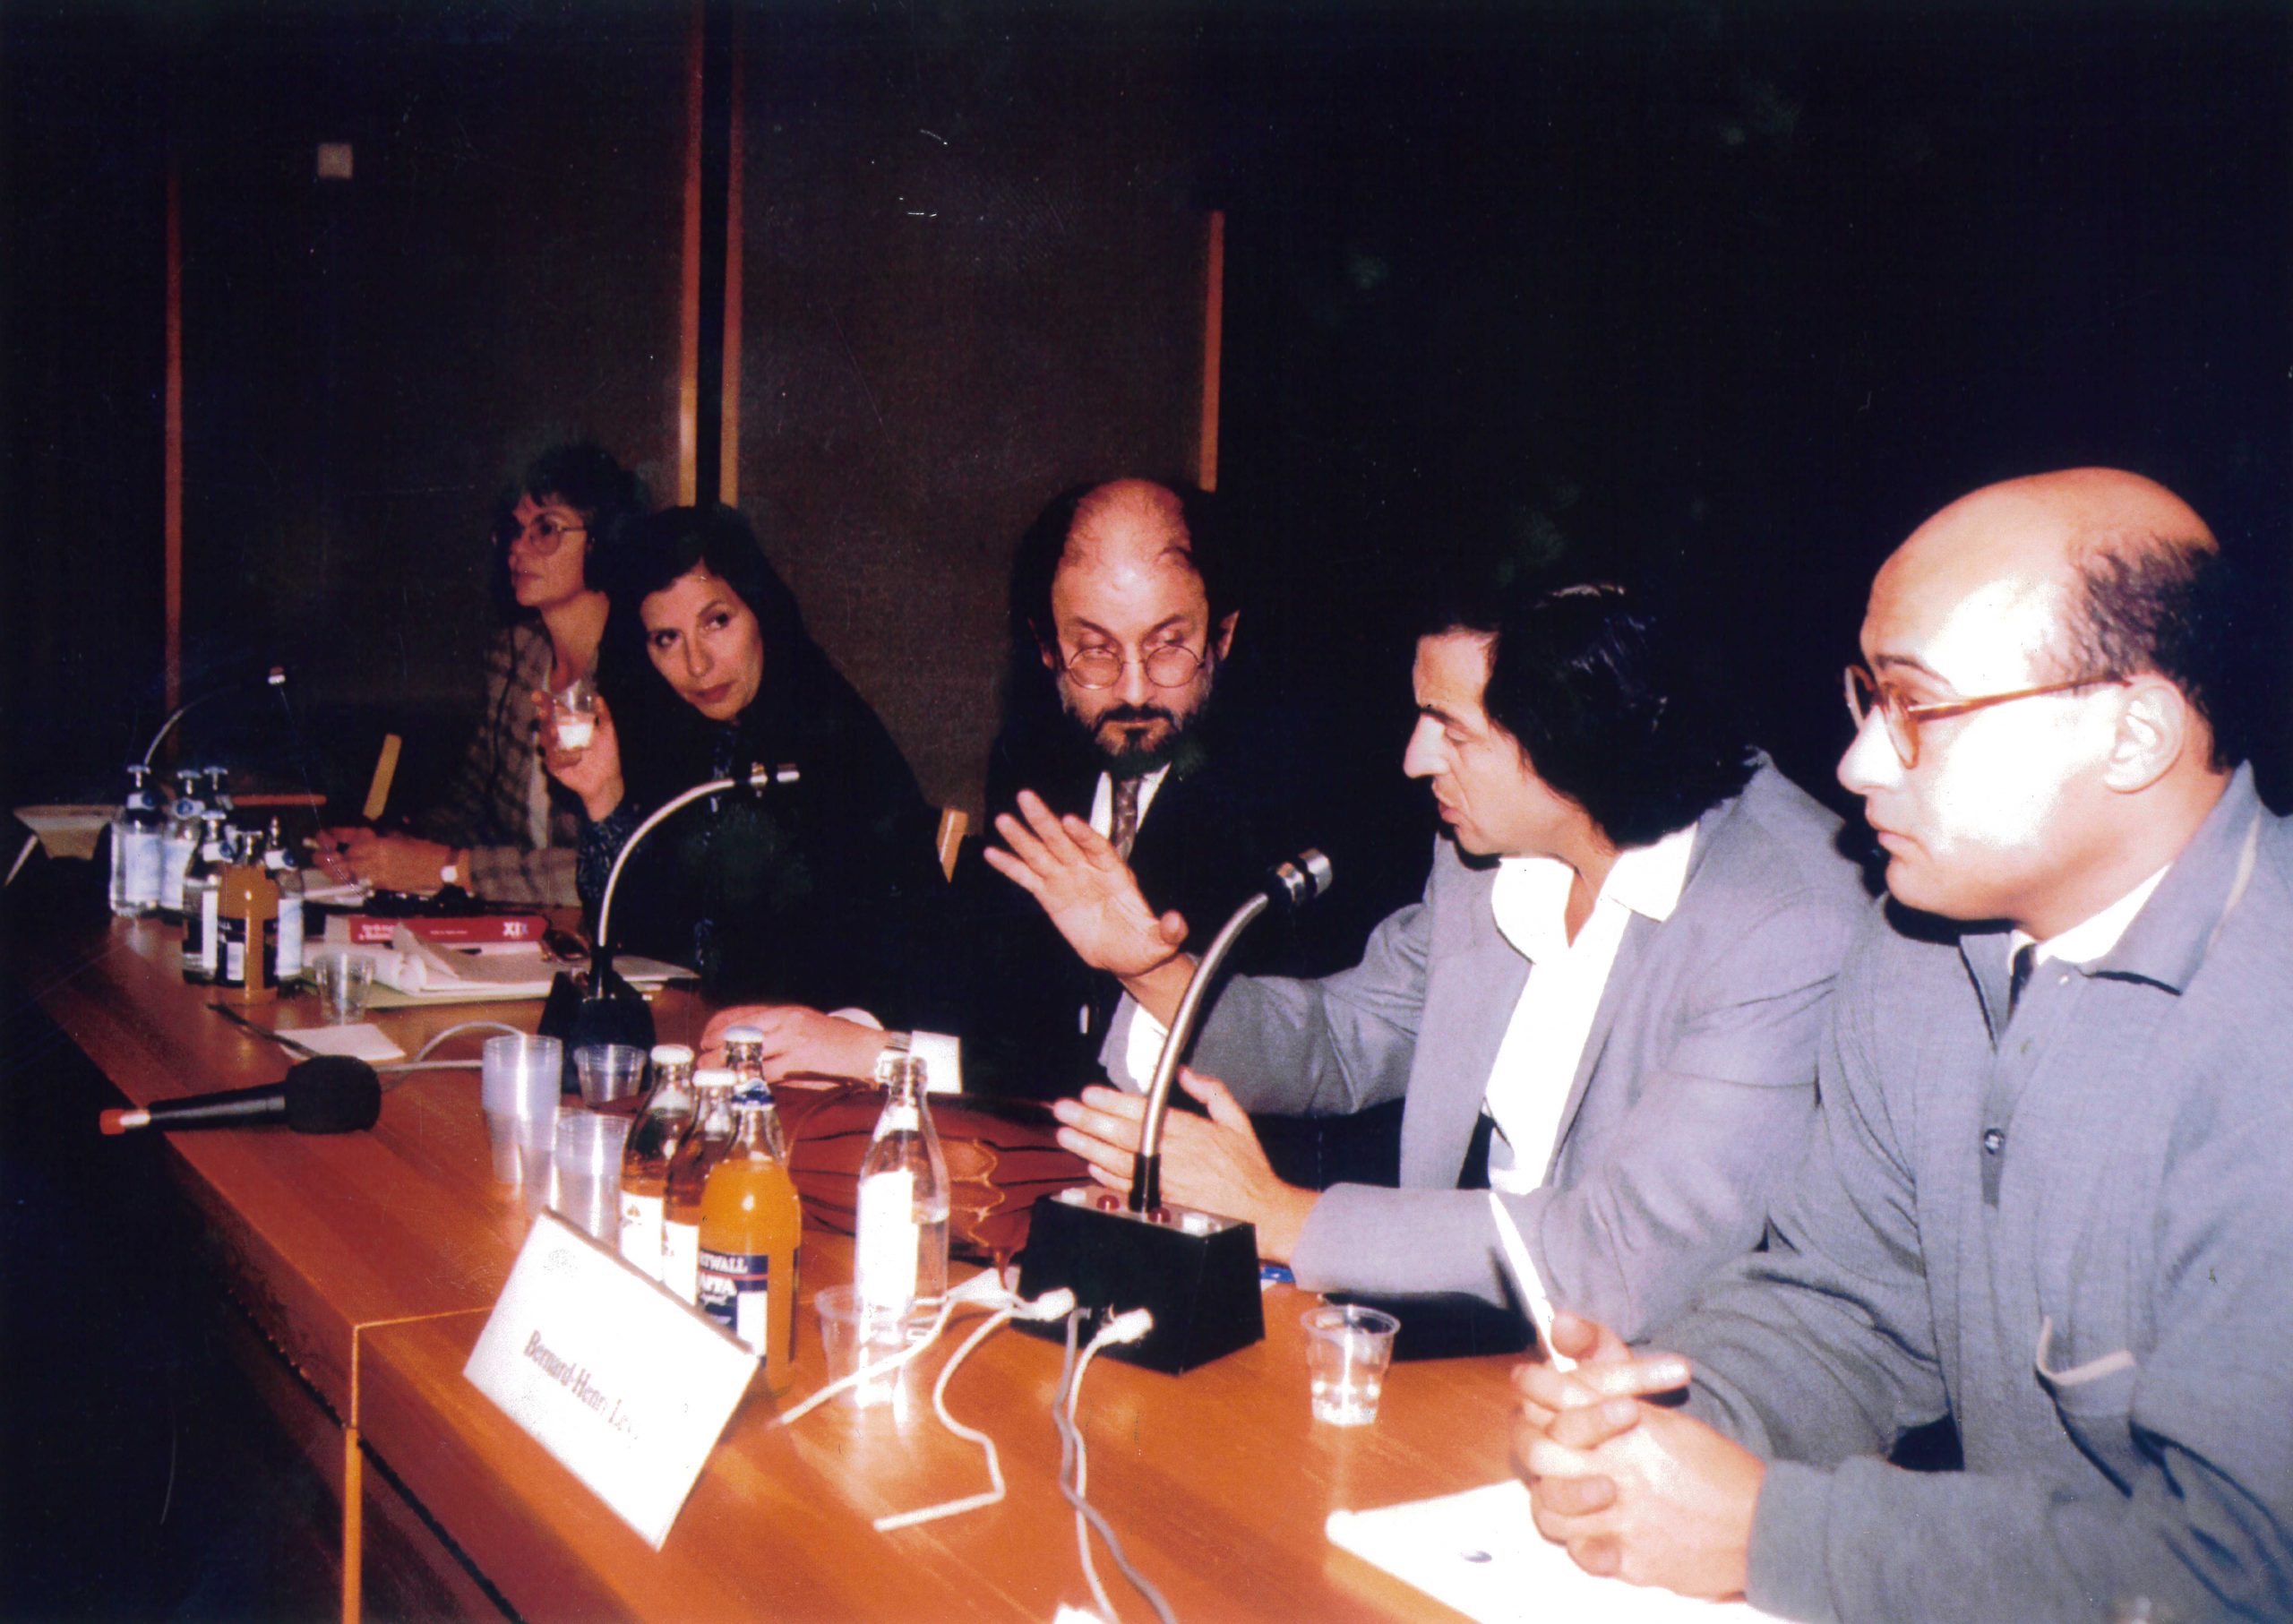 Gabi Gleichman, Bernard-Henri Lévy and Salman Rushdie in Helsinki in October 1992, during the annual meeting of the Nordic Council.